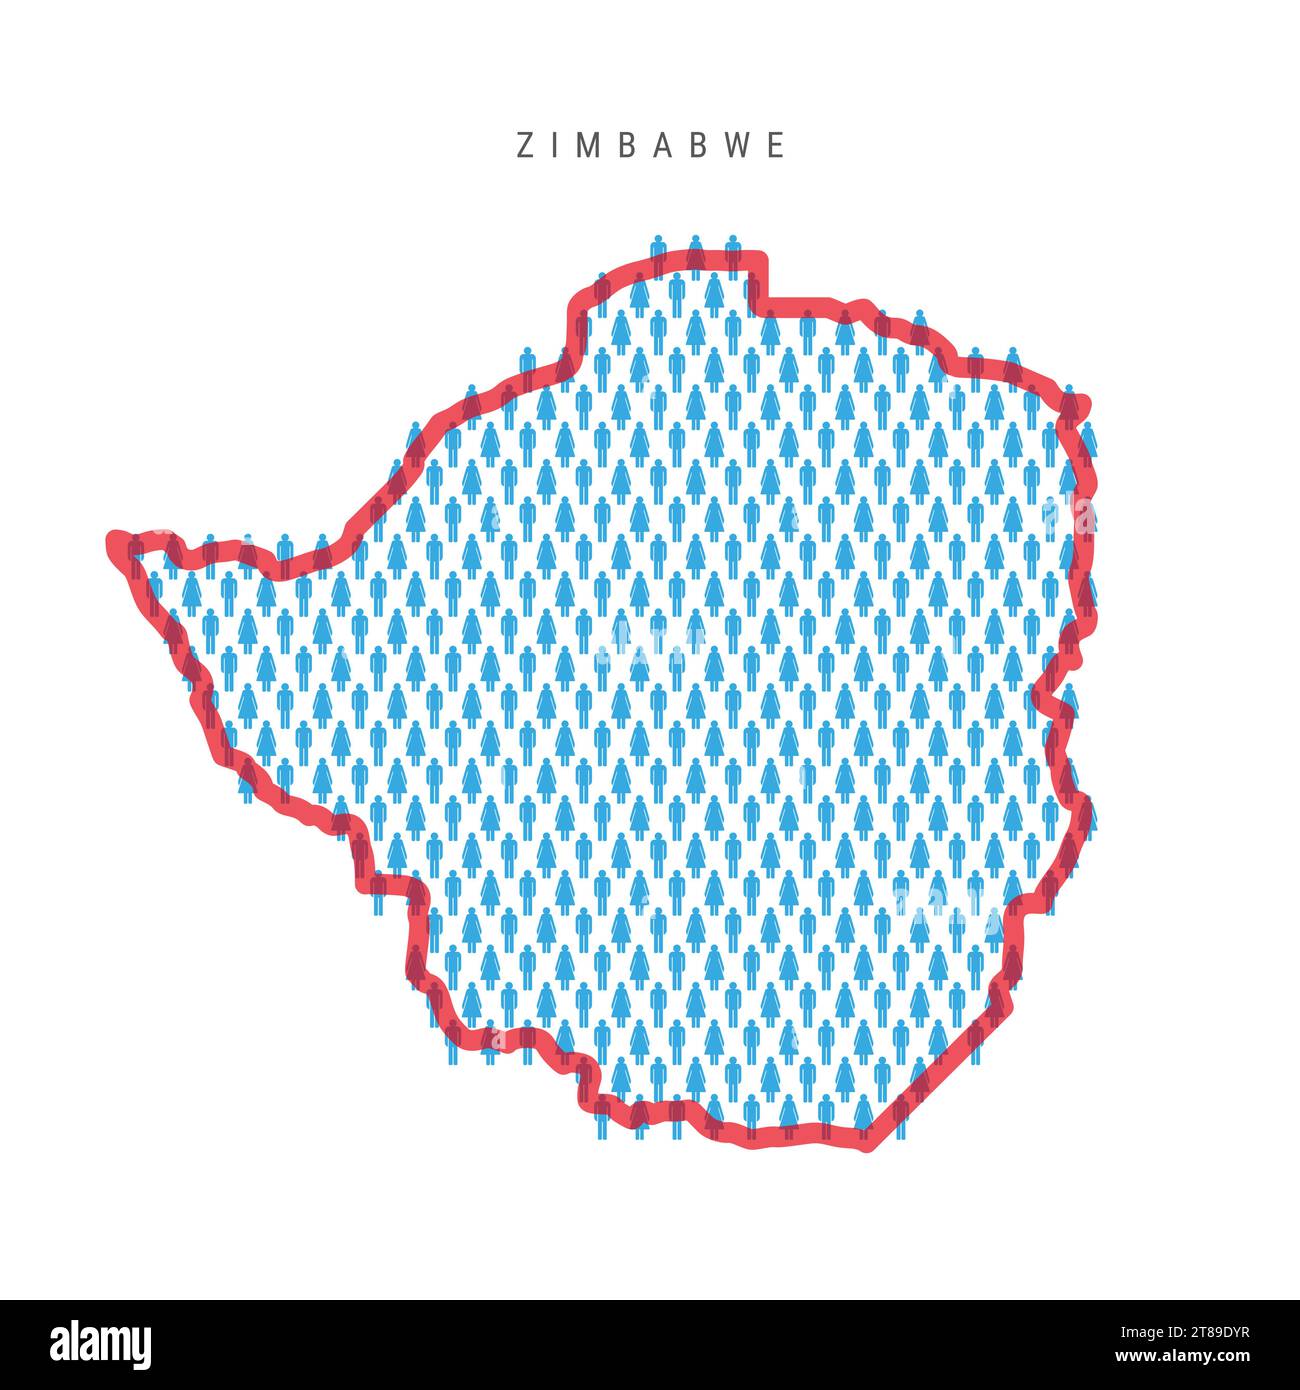 Zimbabwe population map. Stick figures Zimbabwean people map with bold red translucent country border. Pattern of men and women icons. Isolated vector Stock Vector